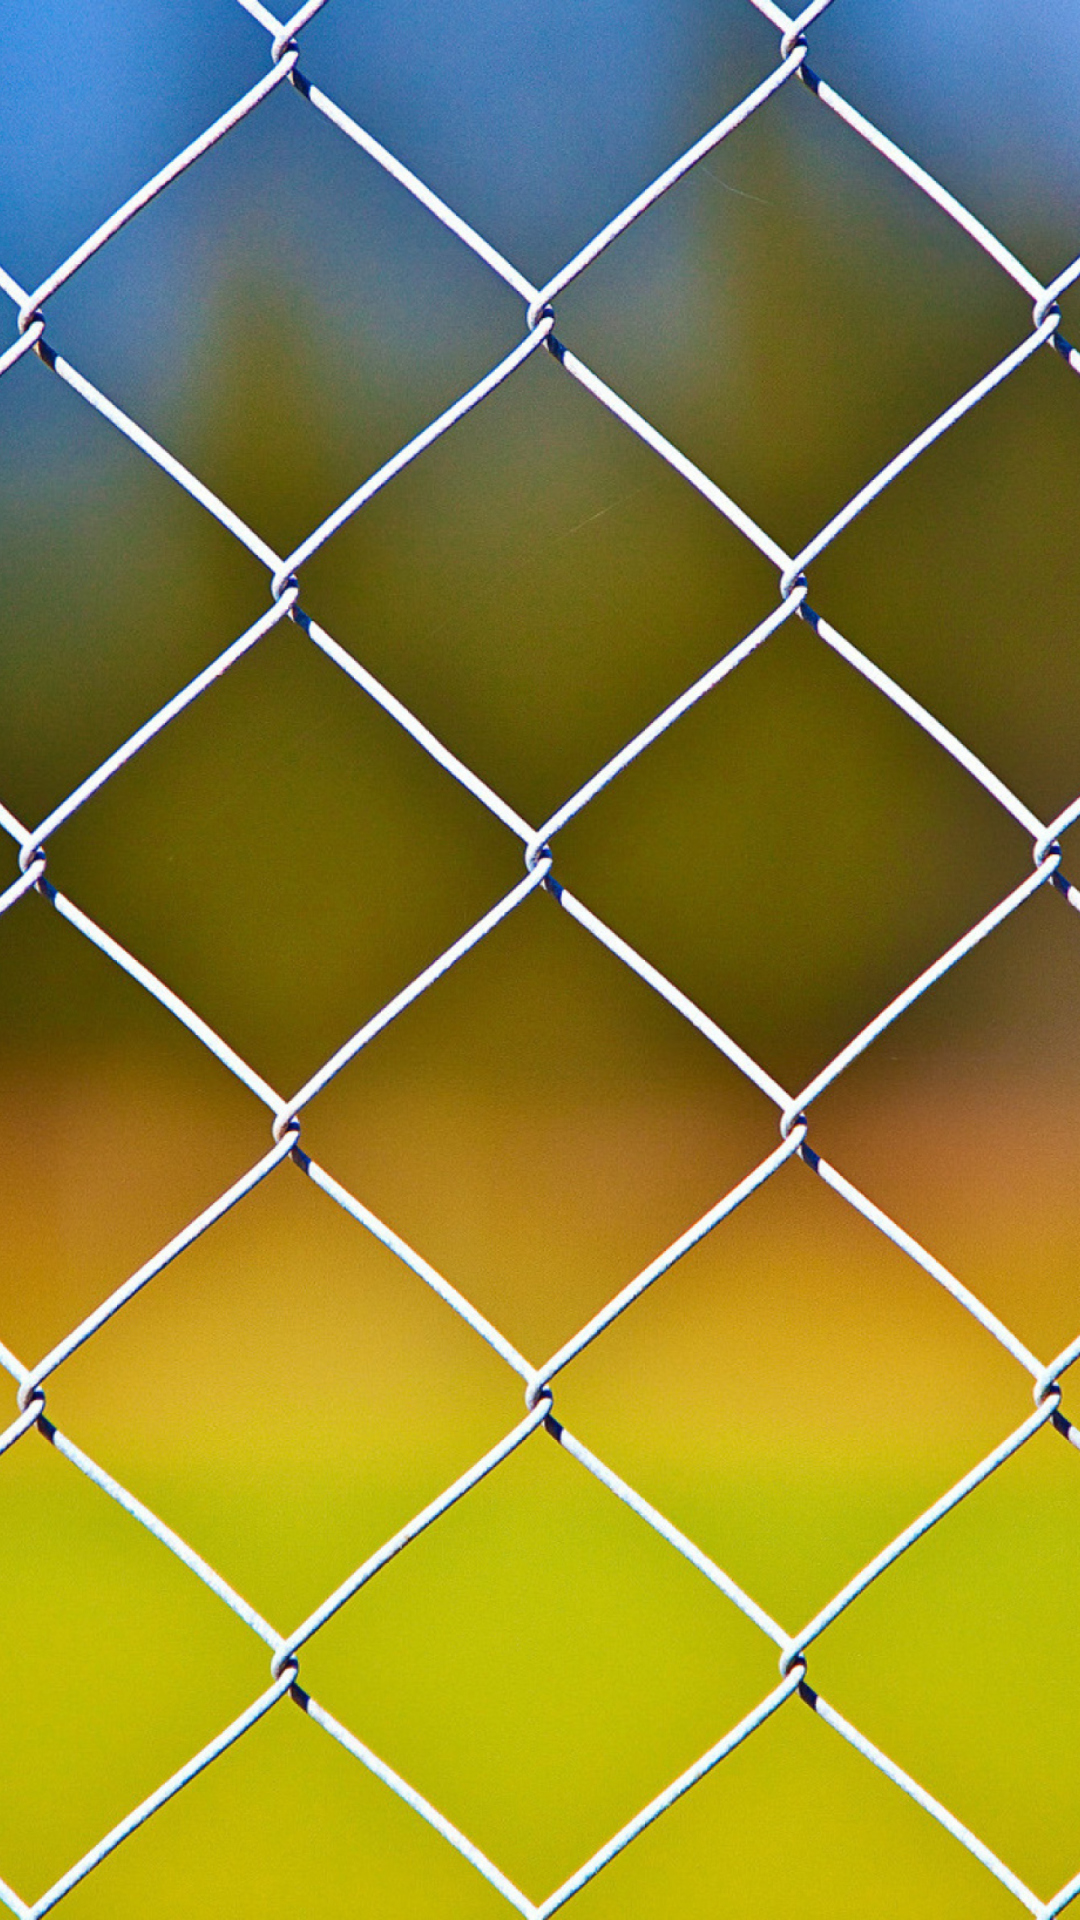 Cage Fence wallpaper 1080x1920